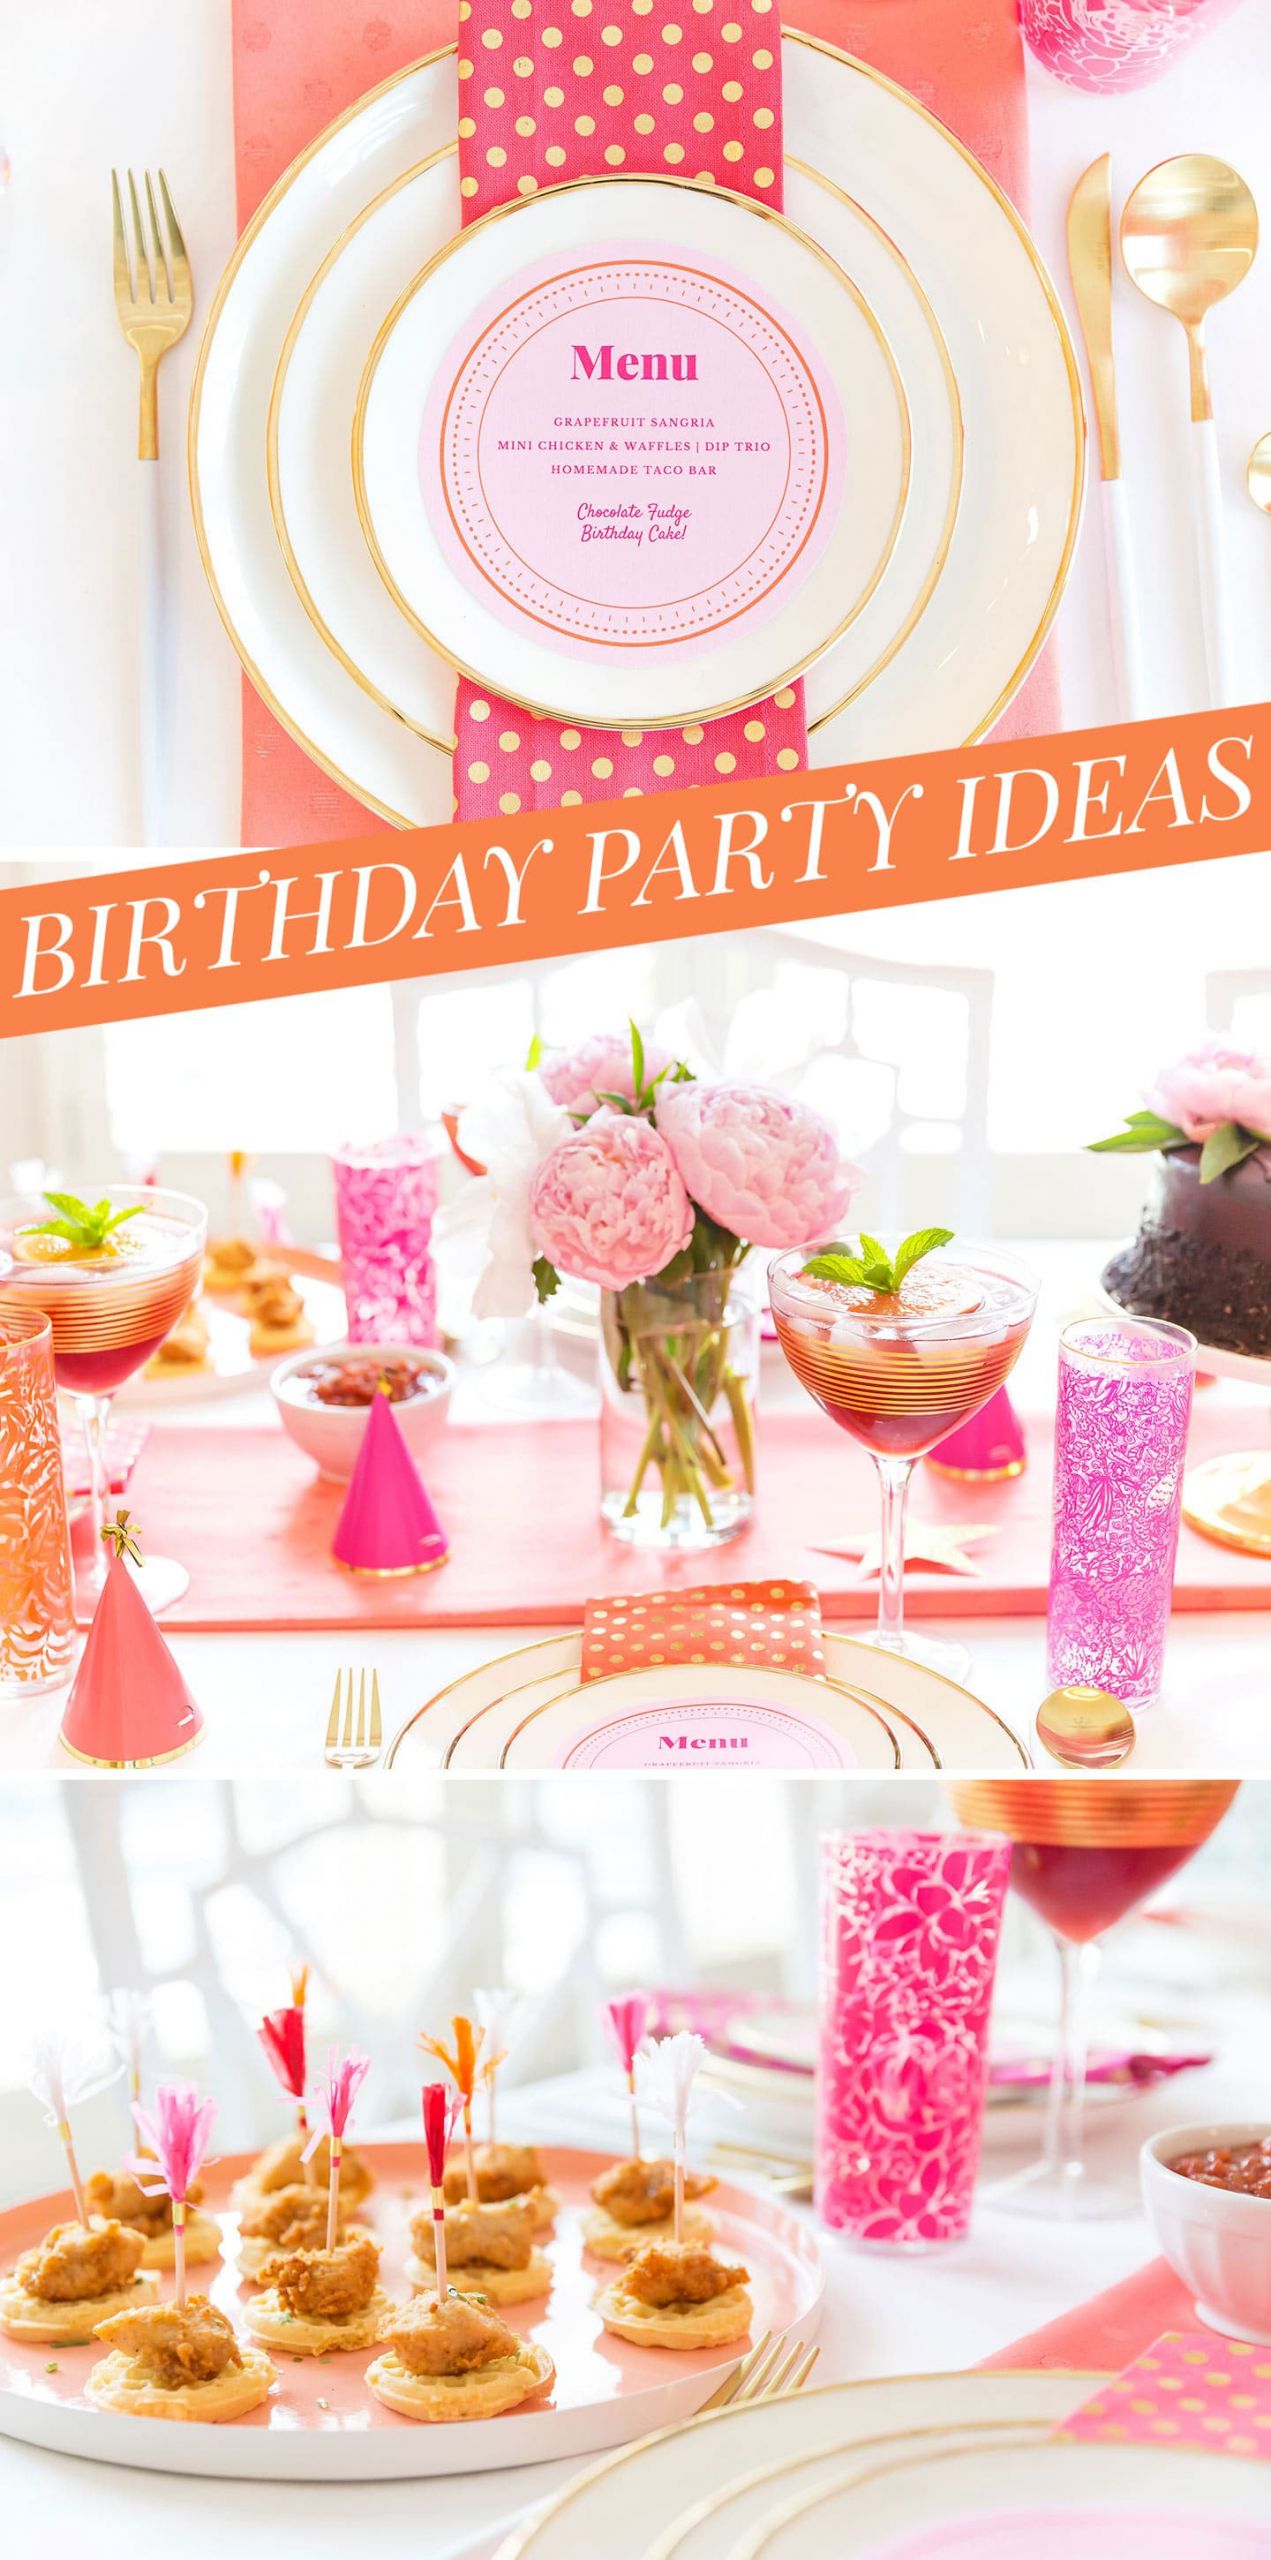 Birthday Party Themes For Adults
 Creative Adult Birthday Party Ideas for the Girls